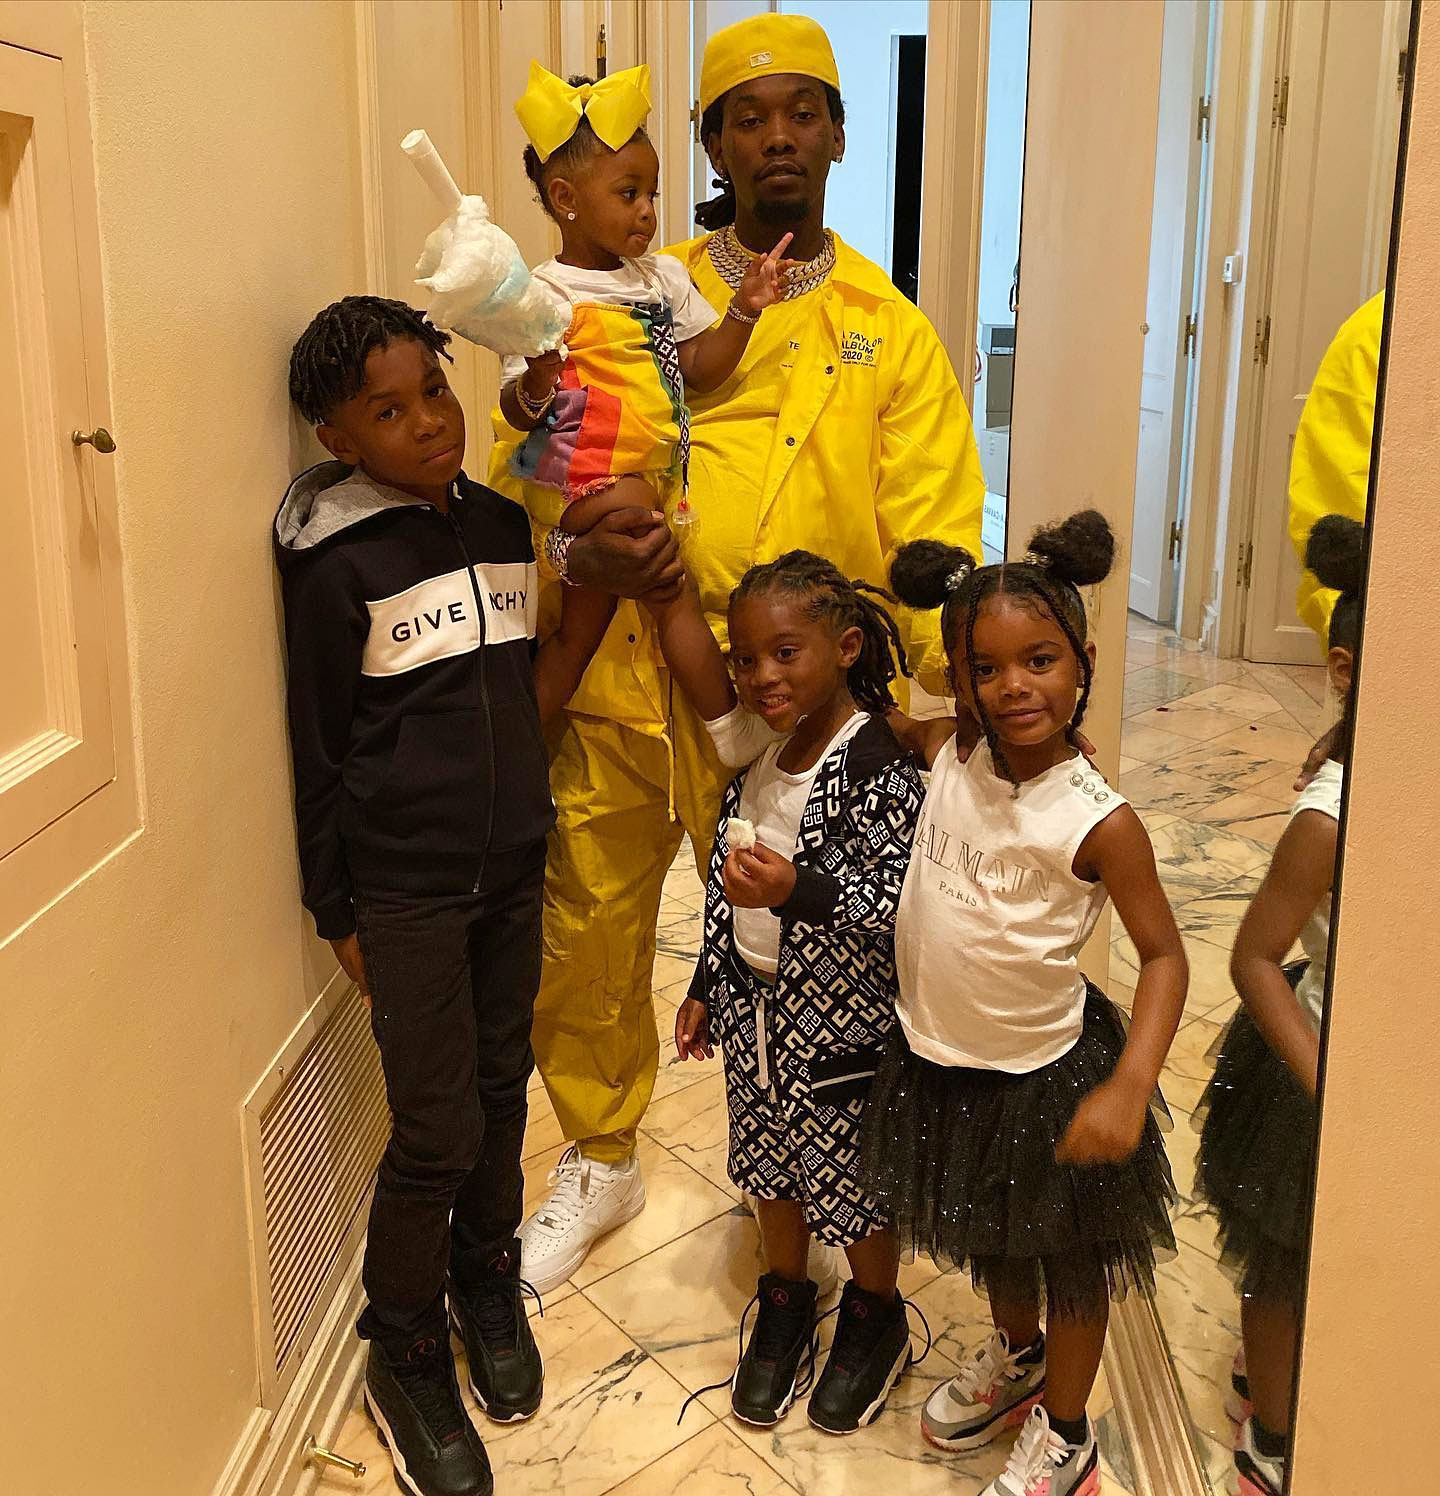 Cardi B shares adorable family photos with husband Offset from